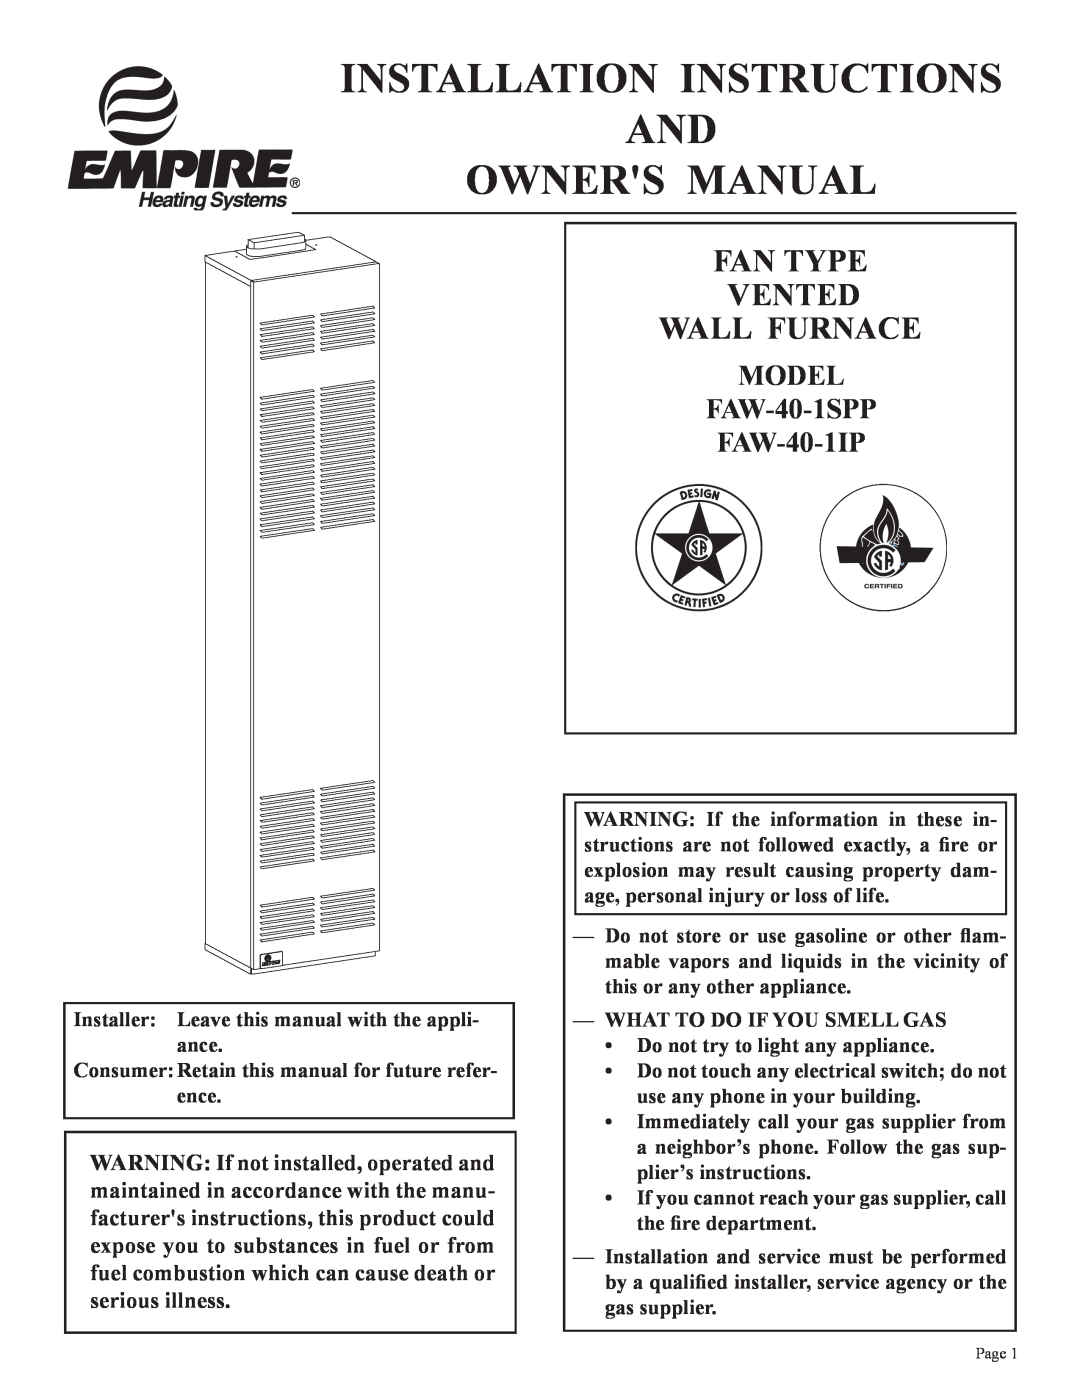 Empire Comfort Systems installation instructions Fan Type Vented Wall Furnace, MODEL FAW-40-1SPP FAW-40-1IP 